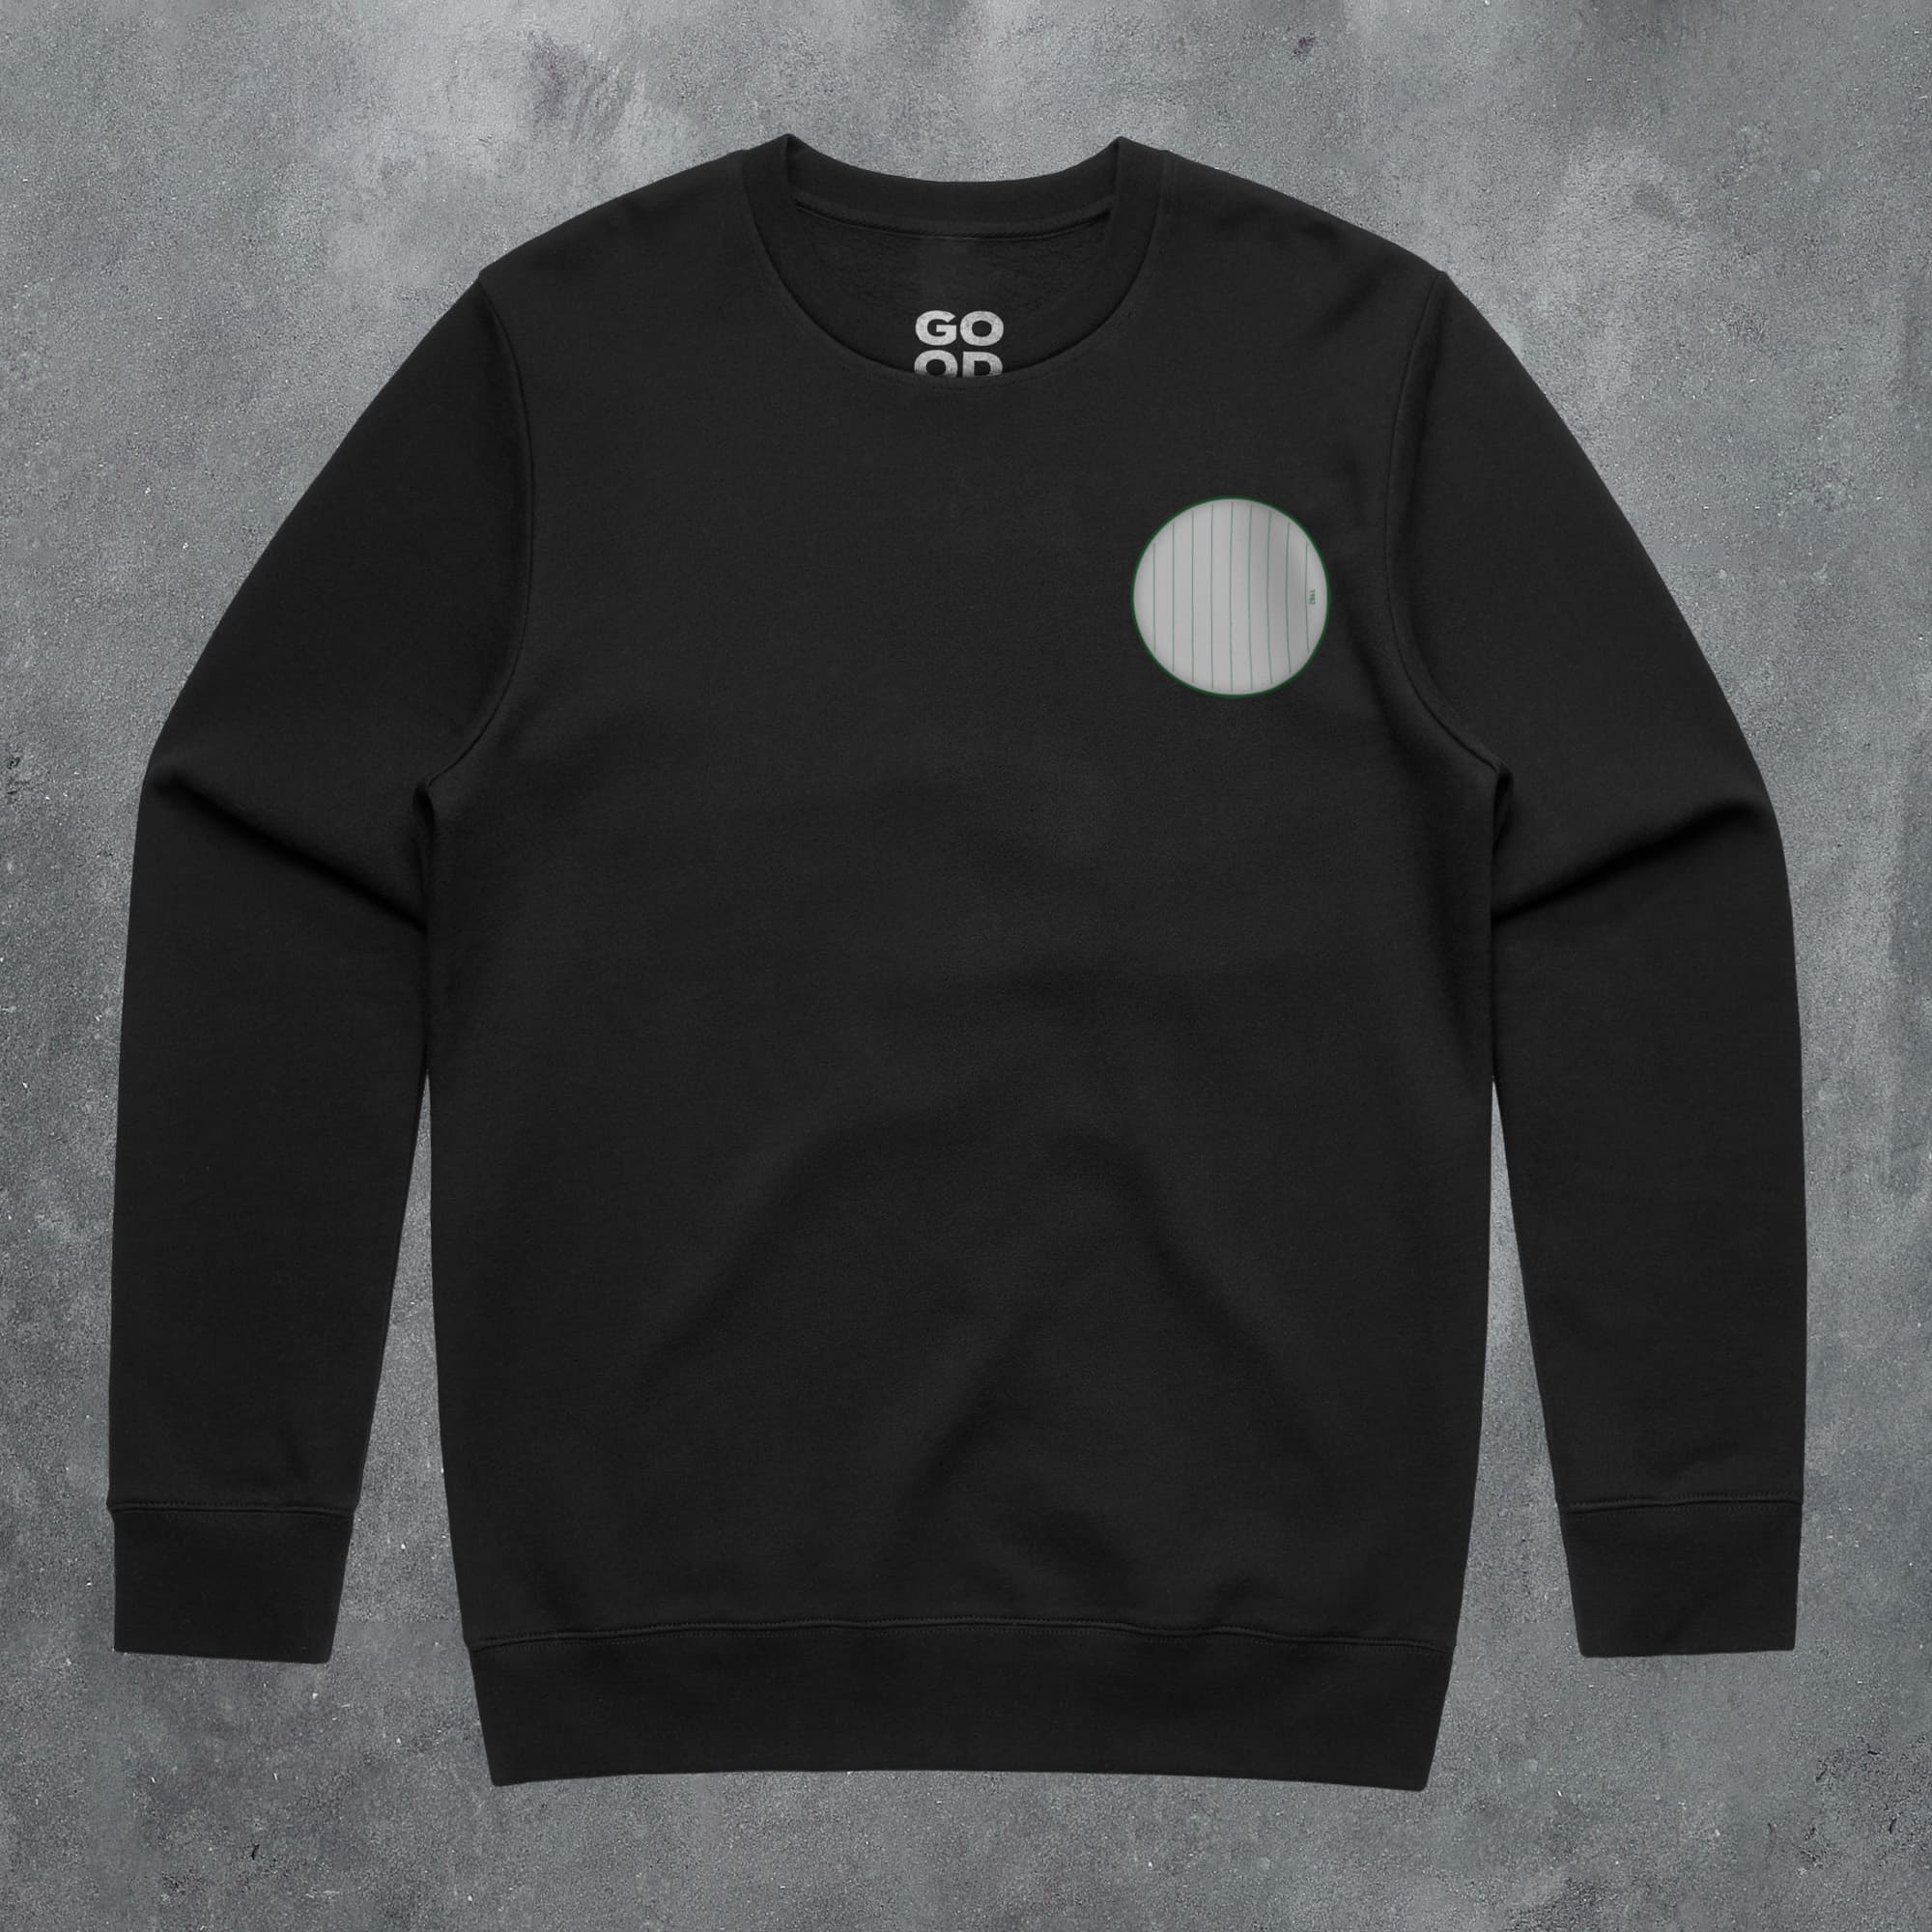 a black sweatshirt with a white circle on it